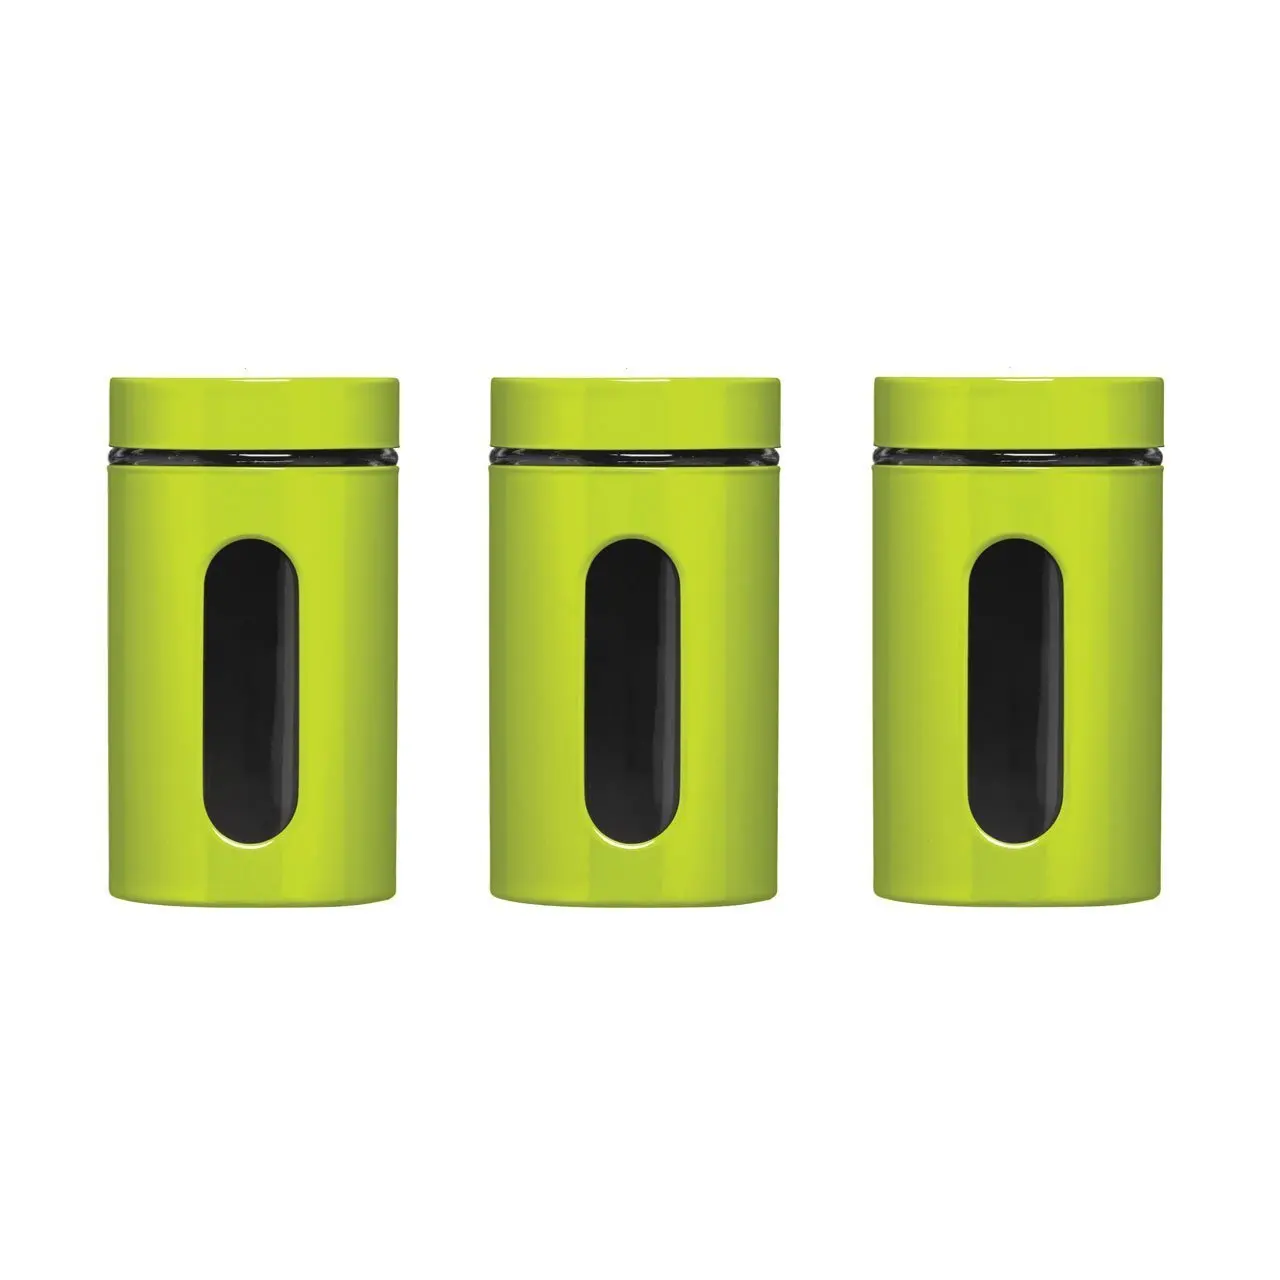 Fresh lime green kitchen canisters Cheap Lime Green Kitchen Canisters Find Deals On Line At Alibaba Com